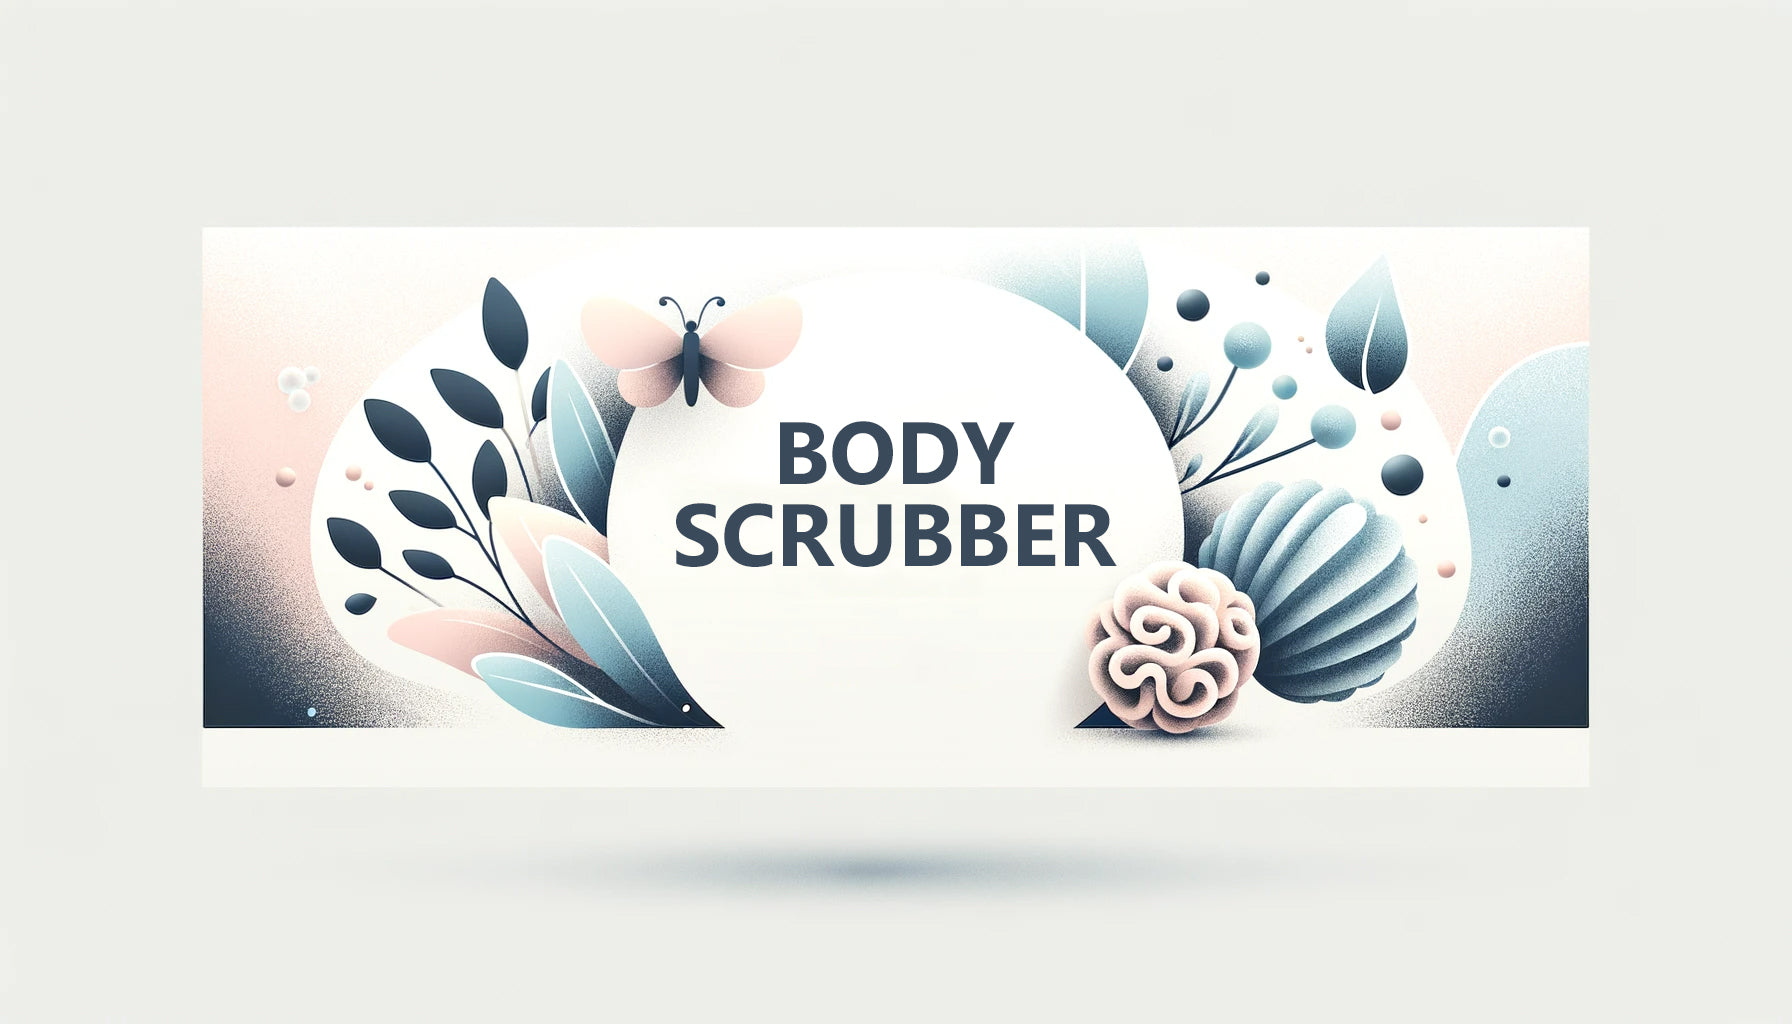 Revitalize your skin with our premium Body Scrubber collection. Designed for gentle exfoliation and deep cleansing, our range offers the perfect balance of comfort and effectiveness